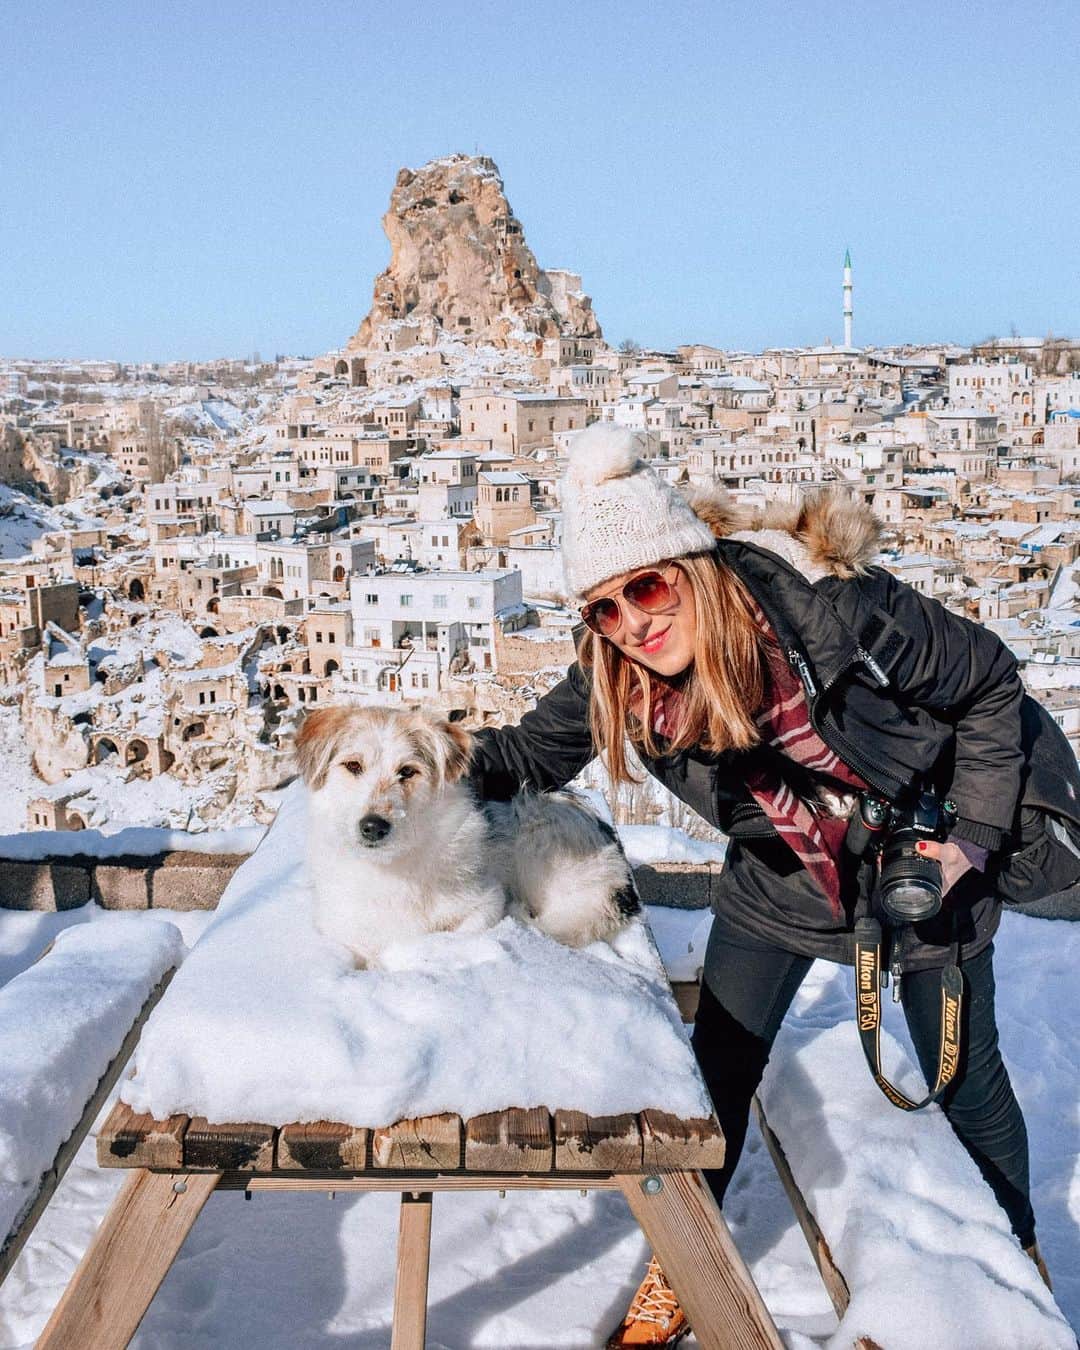 Izkizのインスタグラム：「2 of my favourite things: snow & dogs! Are you more of a dog or a cat person? 🐶🐱   Some people coo over babies but I coo over canines! Whenever I go for a walk in Turkey it takes ages because I have to stop & stroke every dog I see, like this cutie above! 😁 Swipe right to see his gang of snow buddies! 🐶   Edit: @izkizapp」